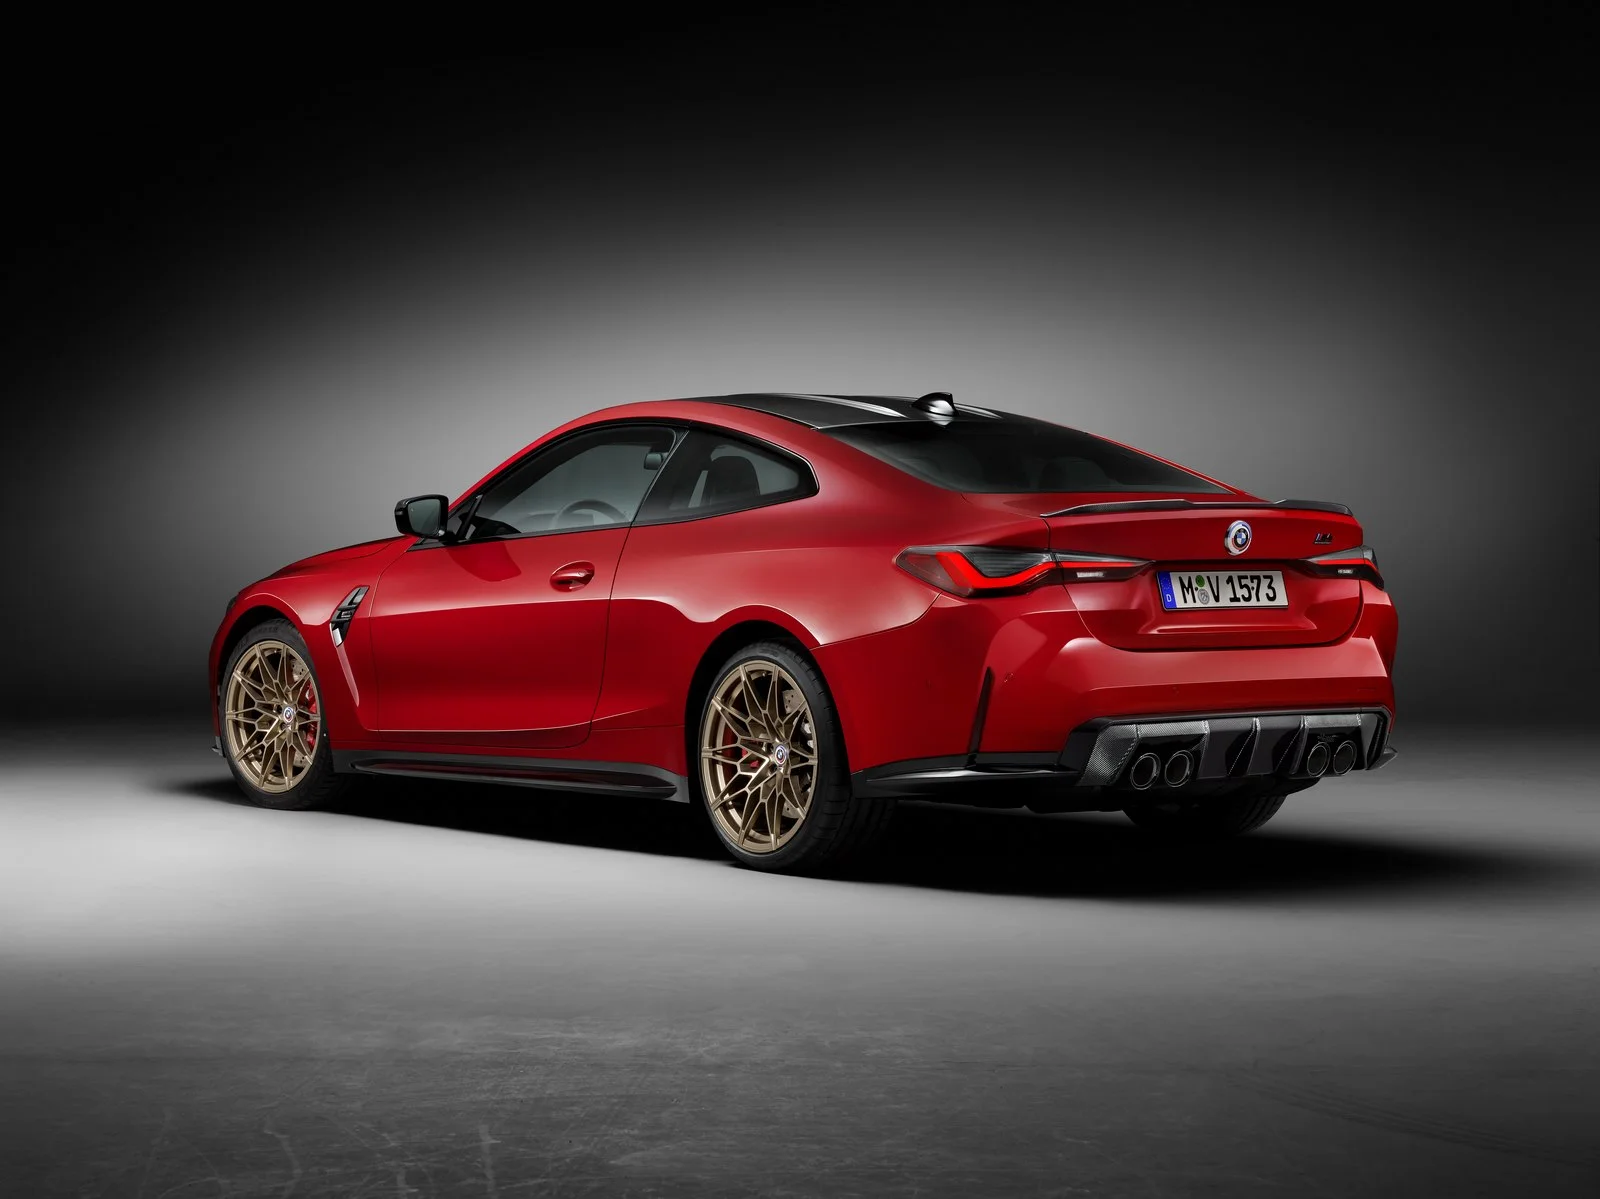 50 Years Of M! BMW M3 and M4 Jahre Limited Edition Revealed! (3)